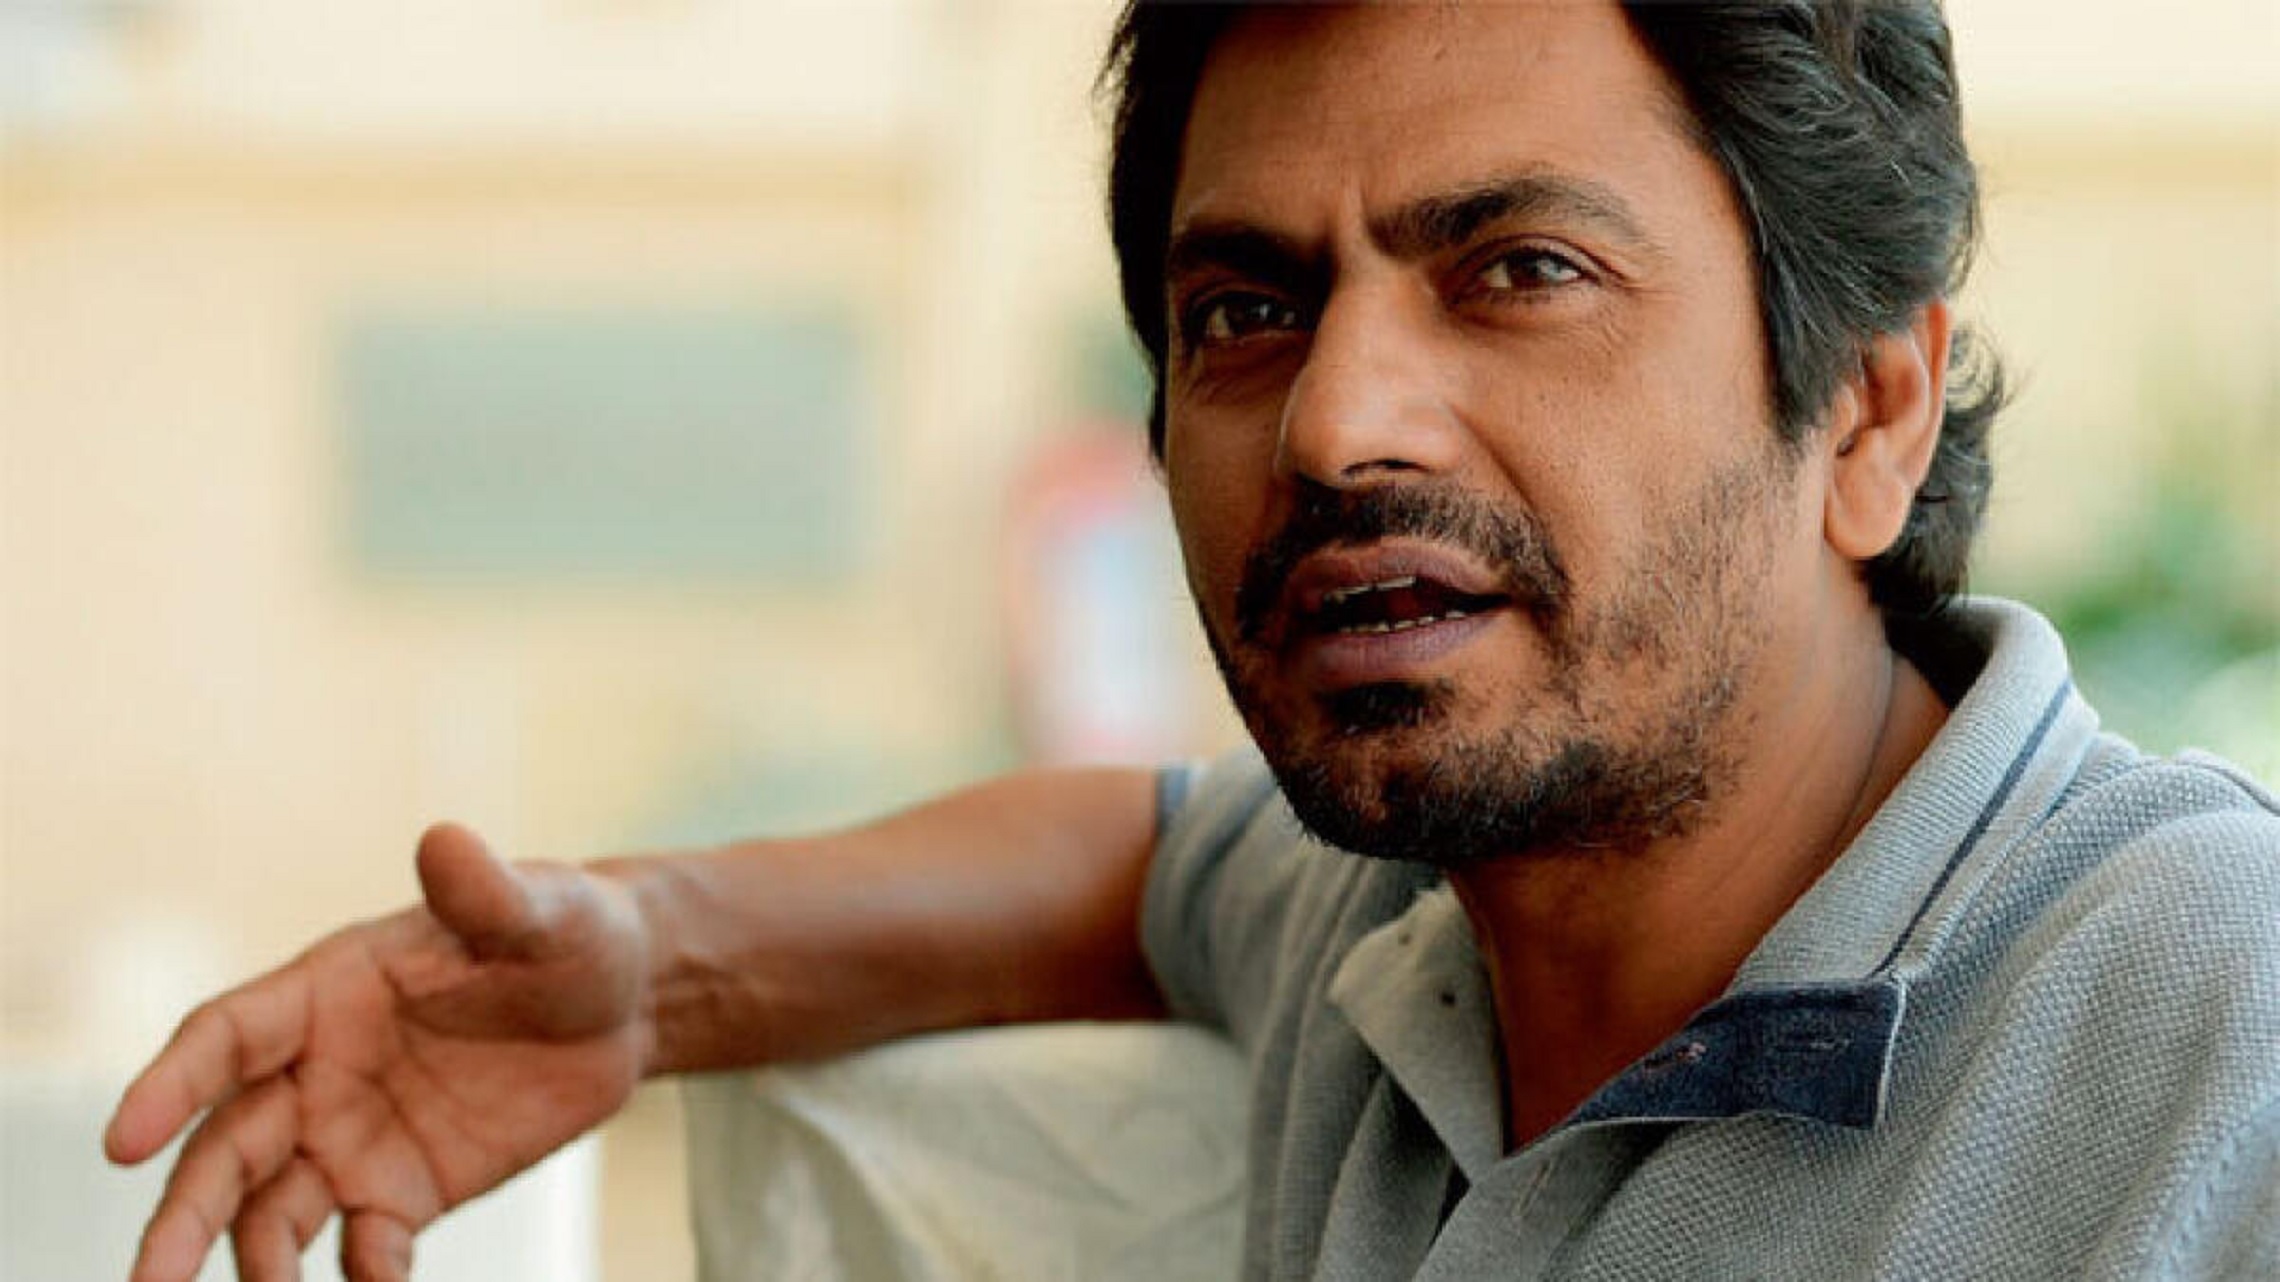 ‘I am done’, Nawazuddin Siddiqui says he won’t do ‘small roles’ in movies even if he is offered Rs. 25 crores